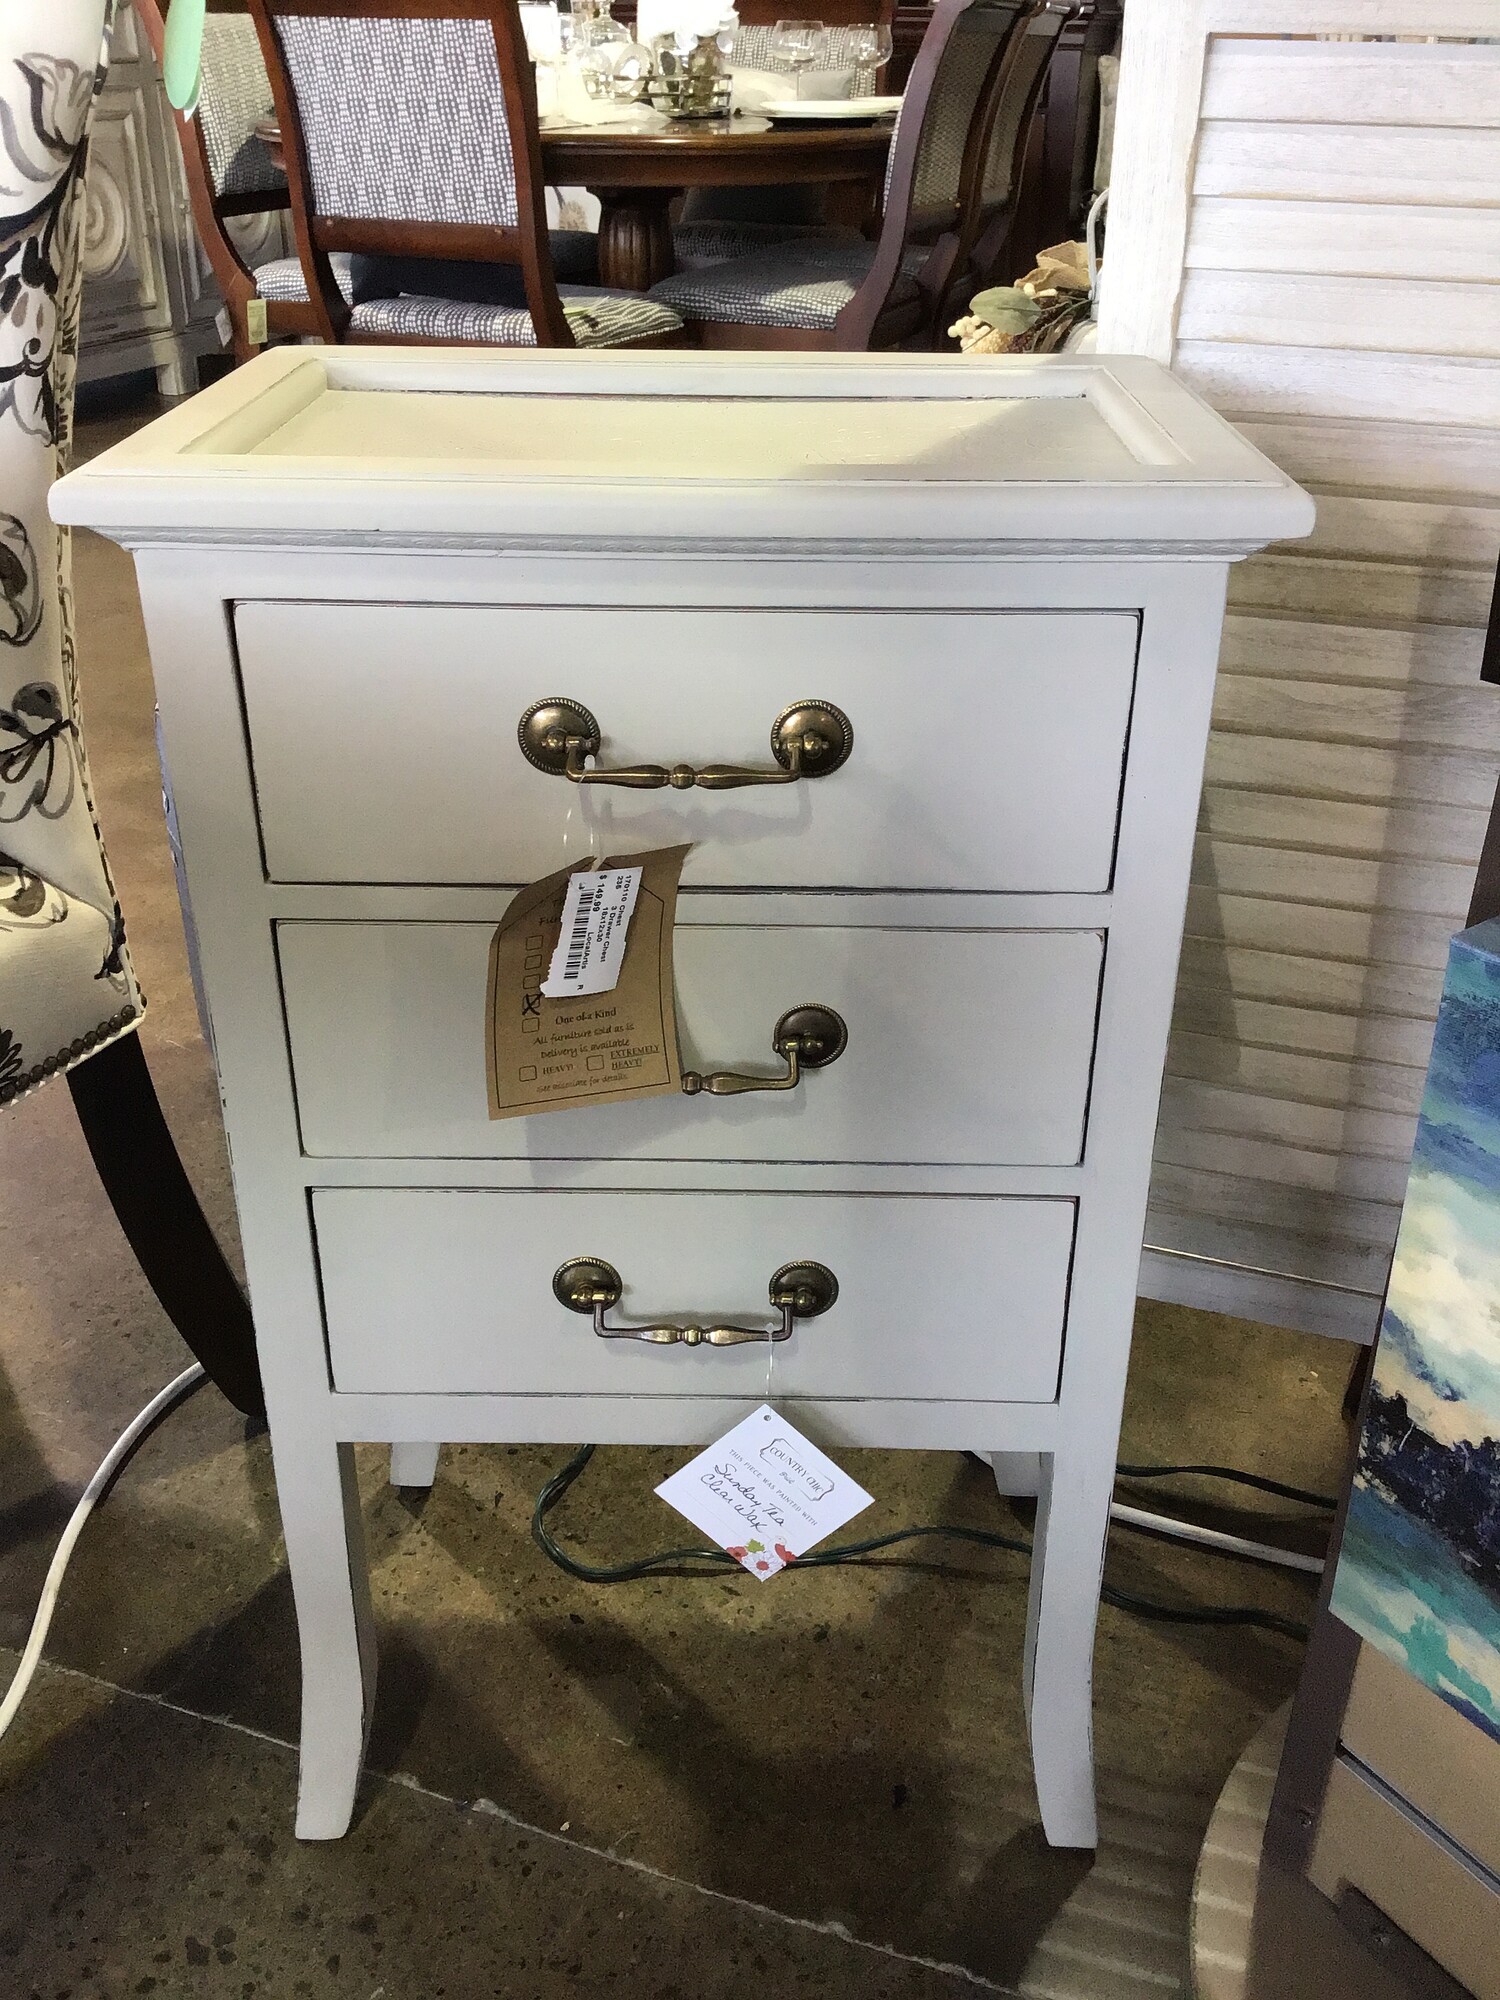 This super functional 3 drawer chest was painted by one of our local artists using Country Chic Sunday Tea paint and clear waxed for protection. It features 3 drawers with bronze handles and a fun patterned top!
Dimensions are 18 in x 12 in x 29-1/2 in